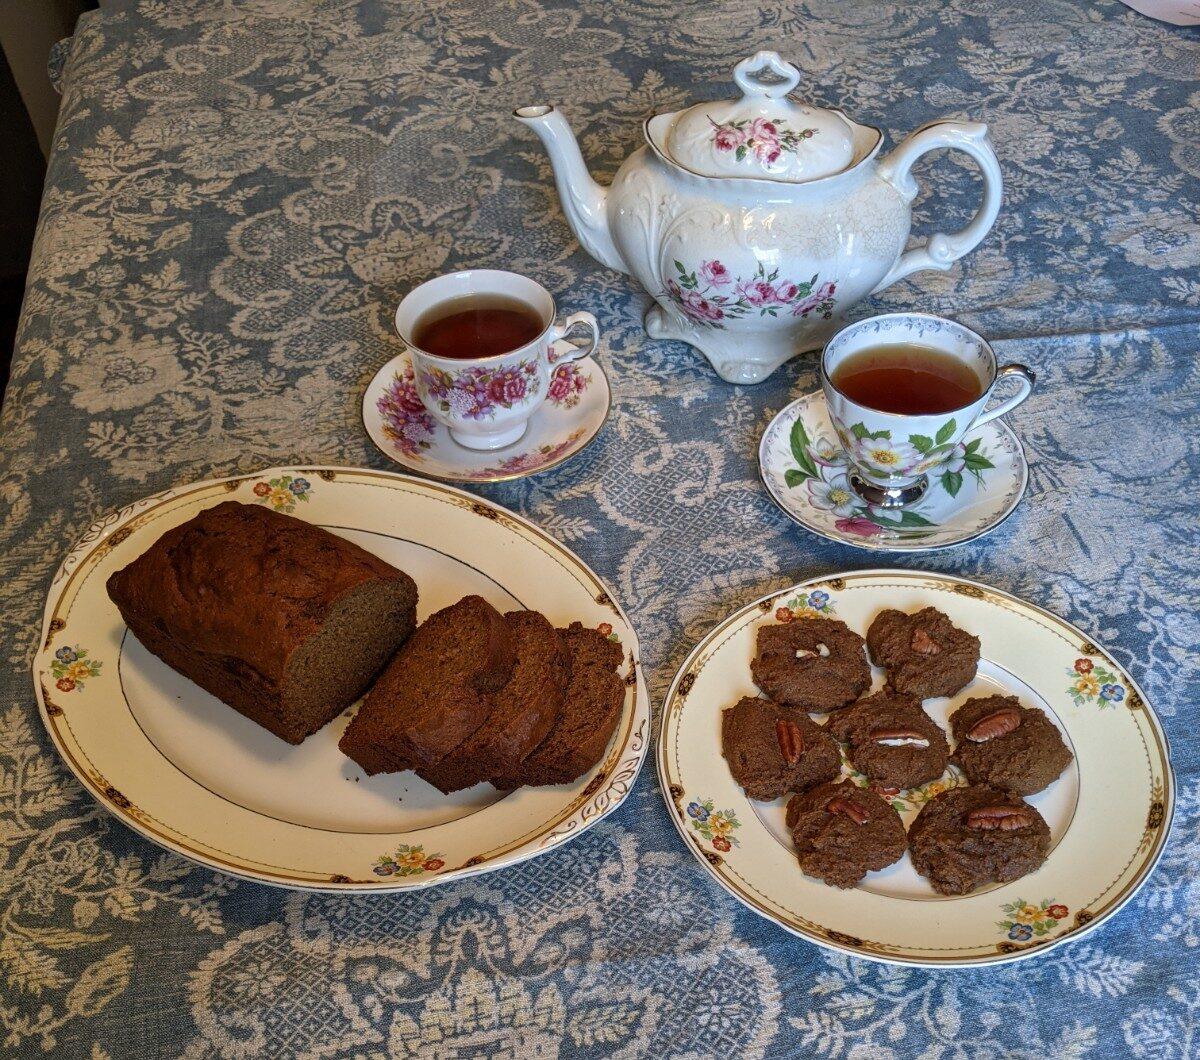 Gram's banana bread and molasses cookies, topped with pecans, with her teapot and teacups. (Courtesy of Donna Rinehart)